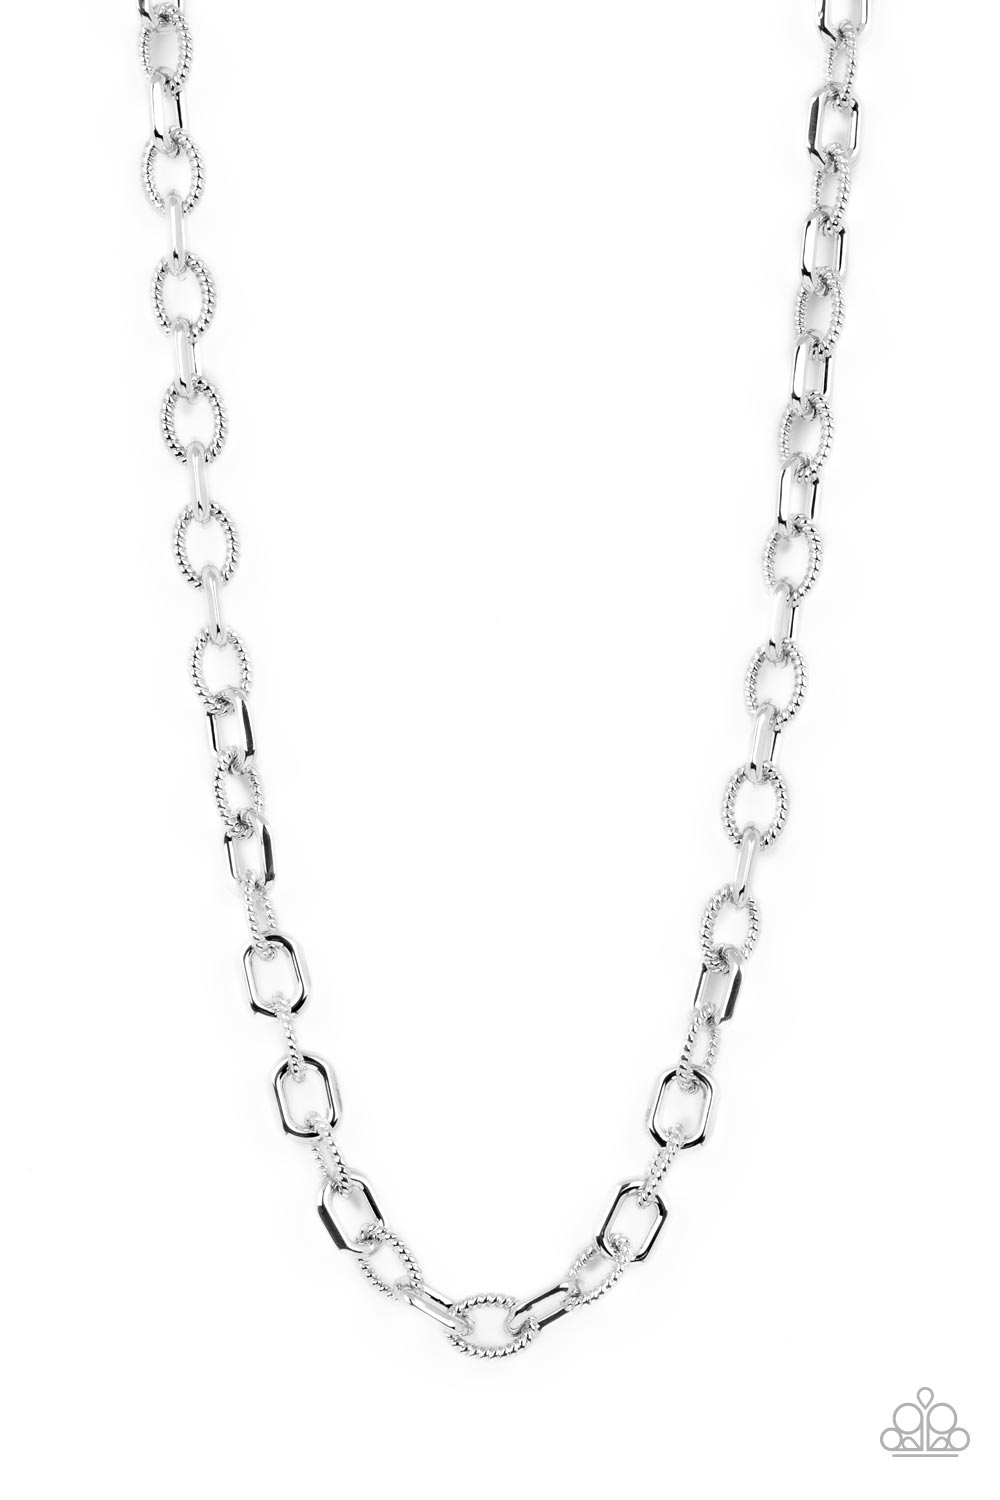 PERFECT MATCH / SET: Modern Motorhead - Silver Chain Urban Necklace AND Double Clutch - Silver Chain Urban Clasp Bracelet